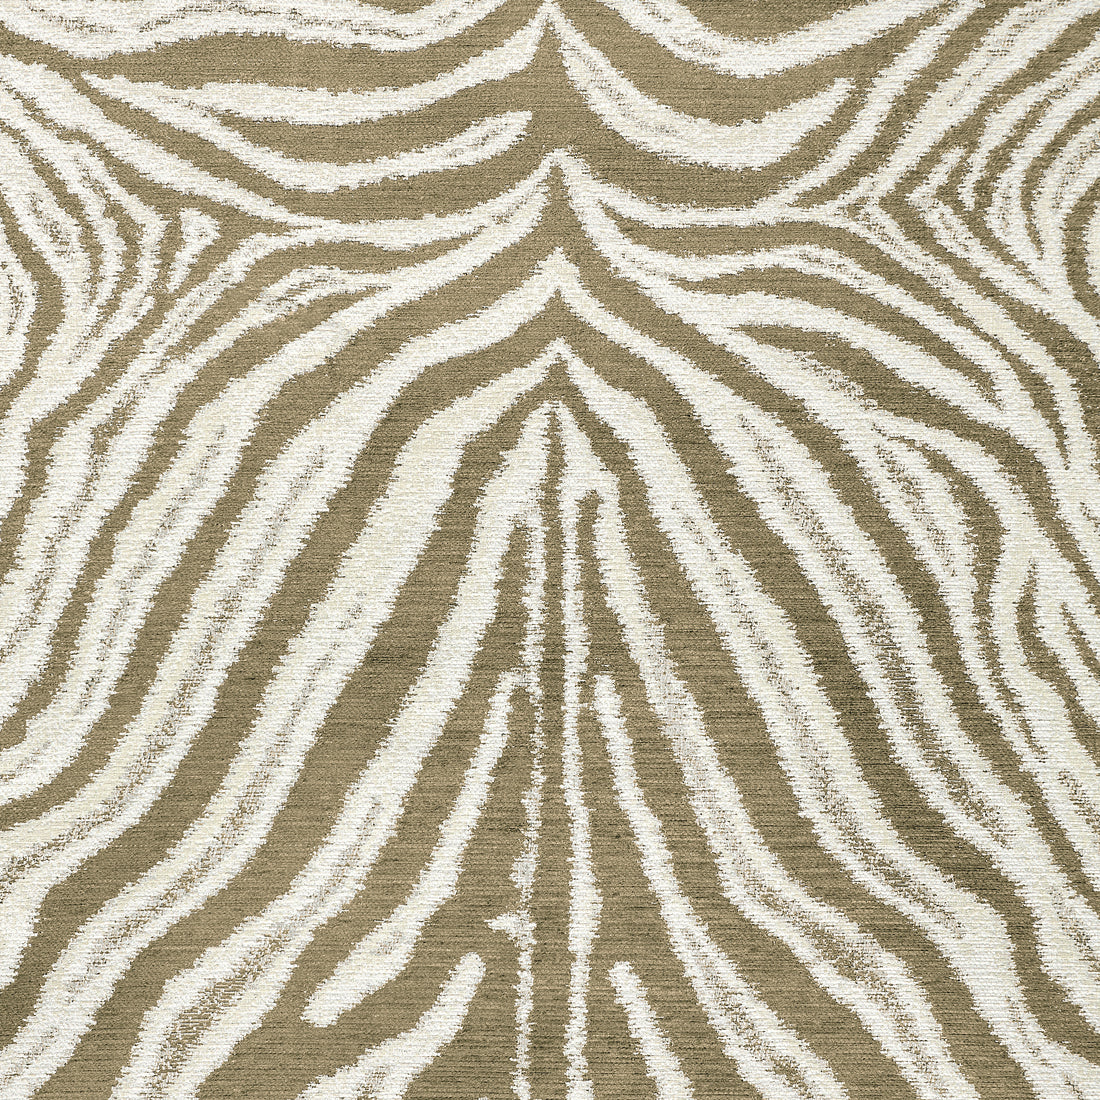 Zamira fabric in linen color - pattern number W80440 - by Thibaut in the Woven Resource Vol 10 Menagerie collection